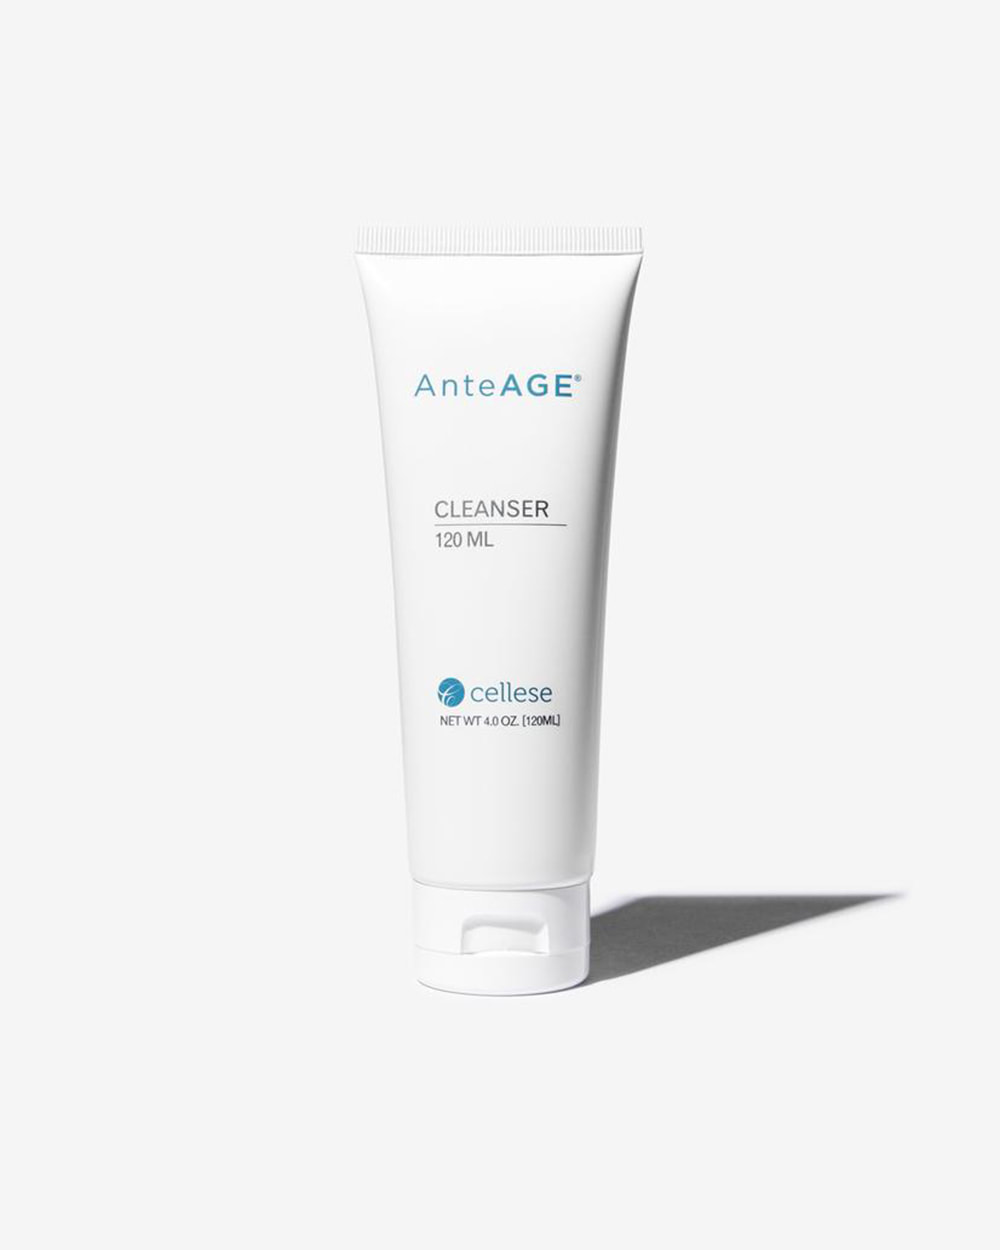 Anteage face cleanser